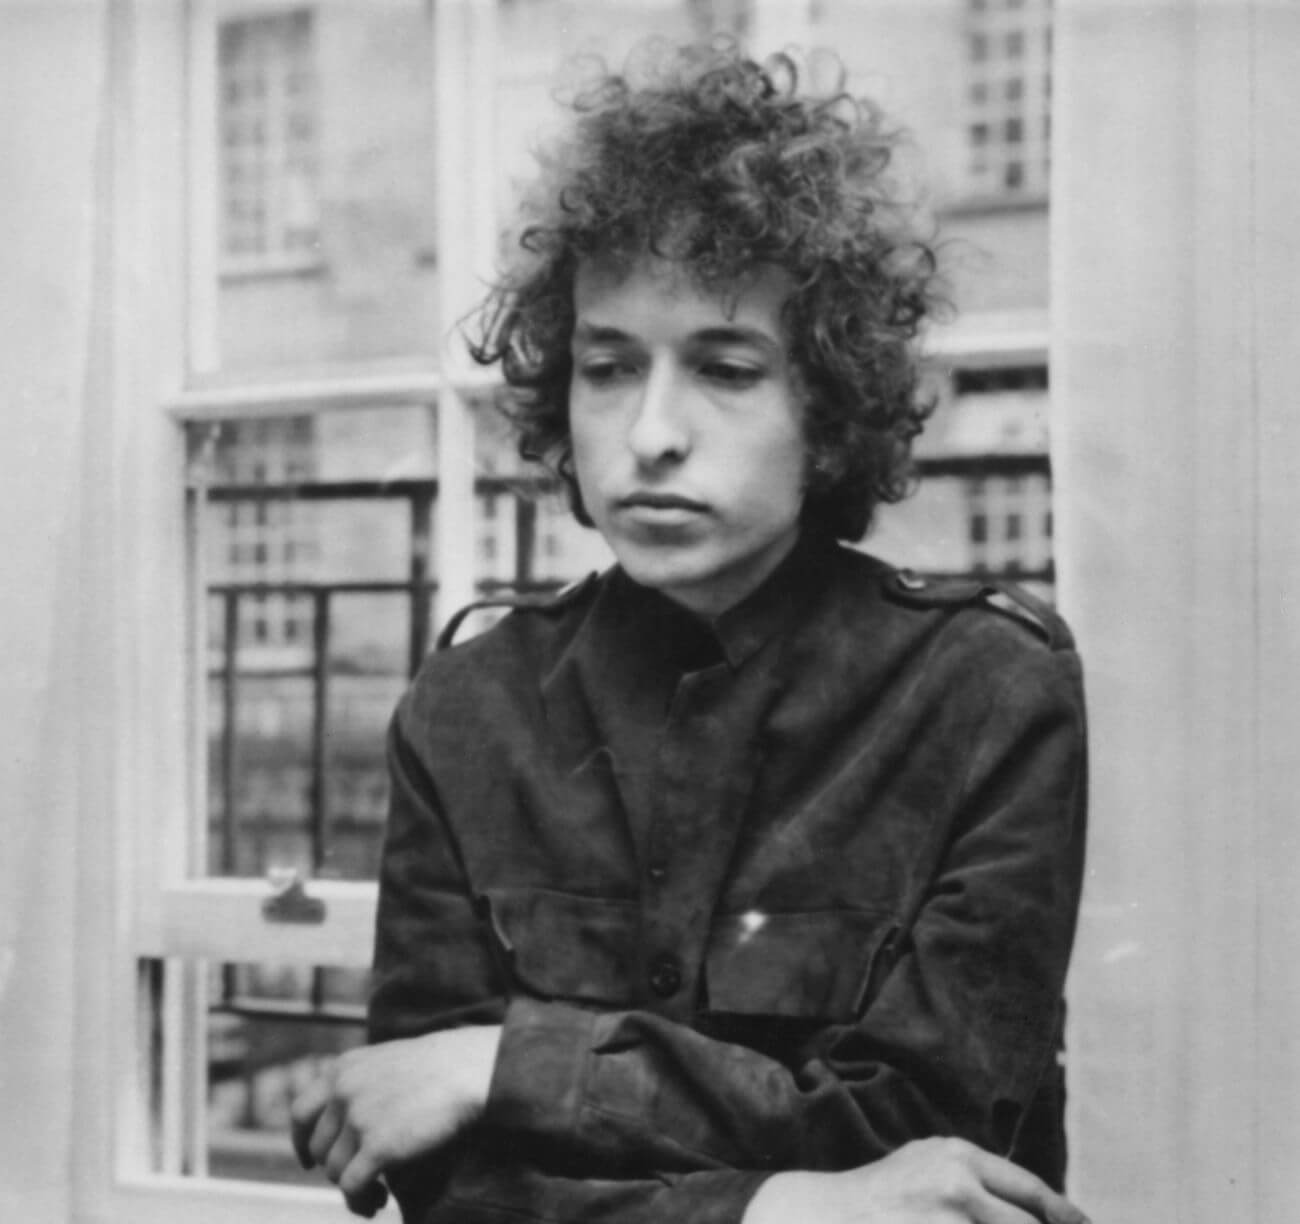 A black and white picture of Bob Dylan leaning against a window.